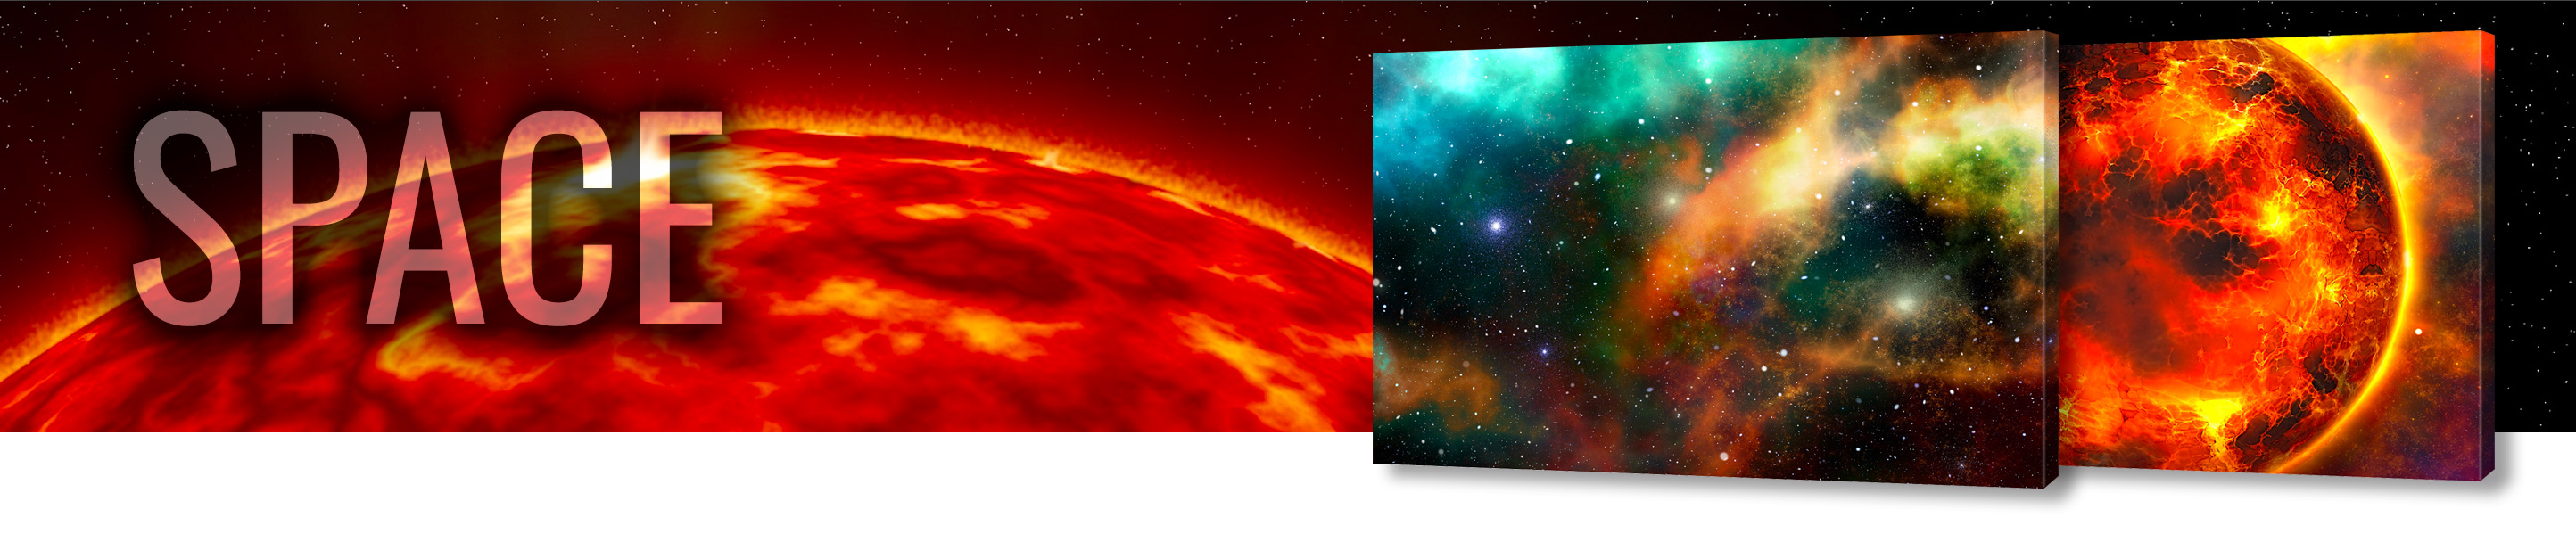 large-canvas-wrap-banner-space-2